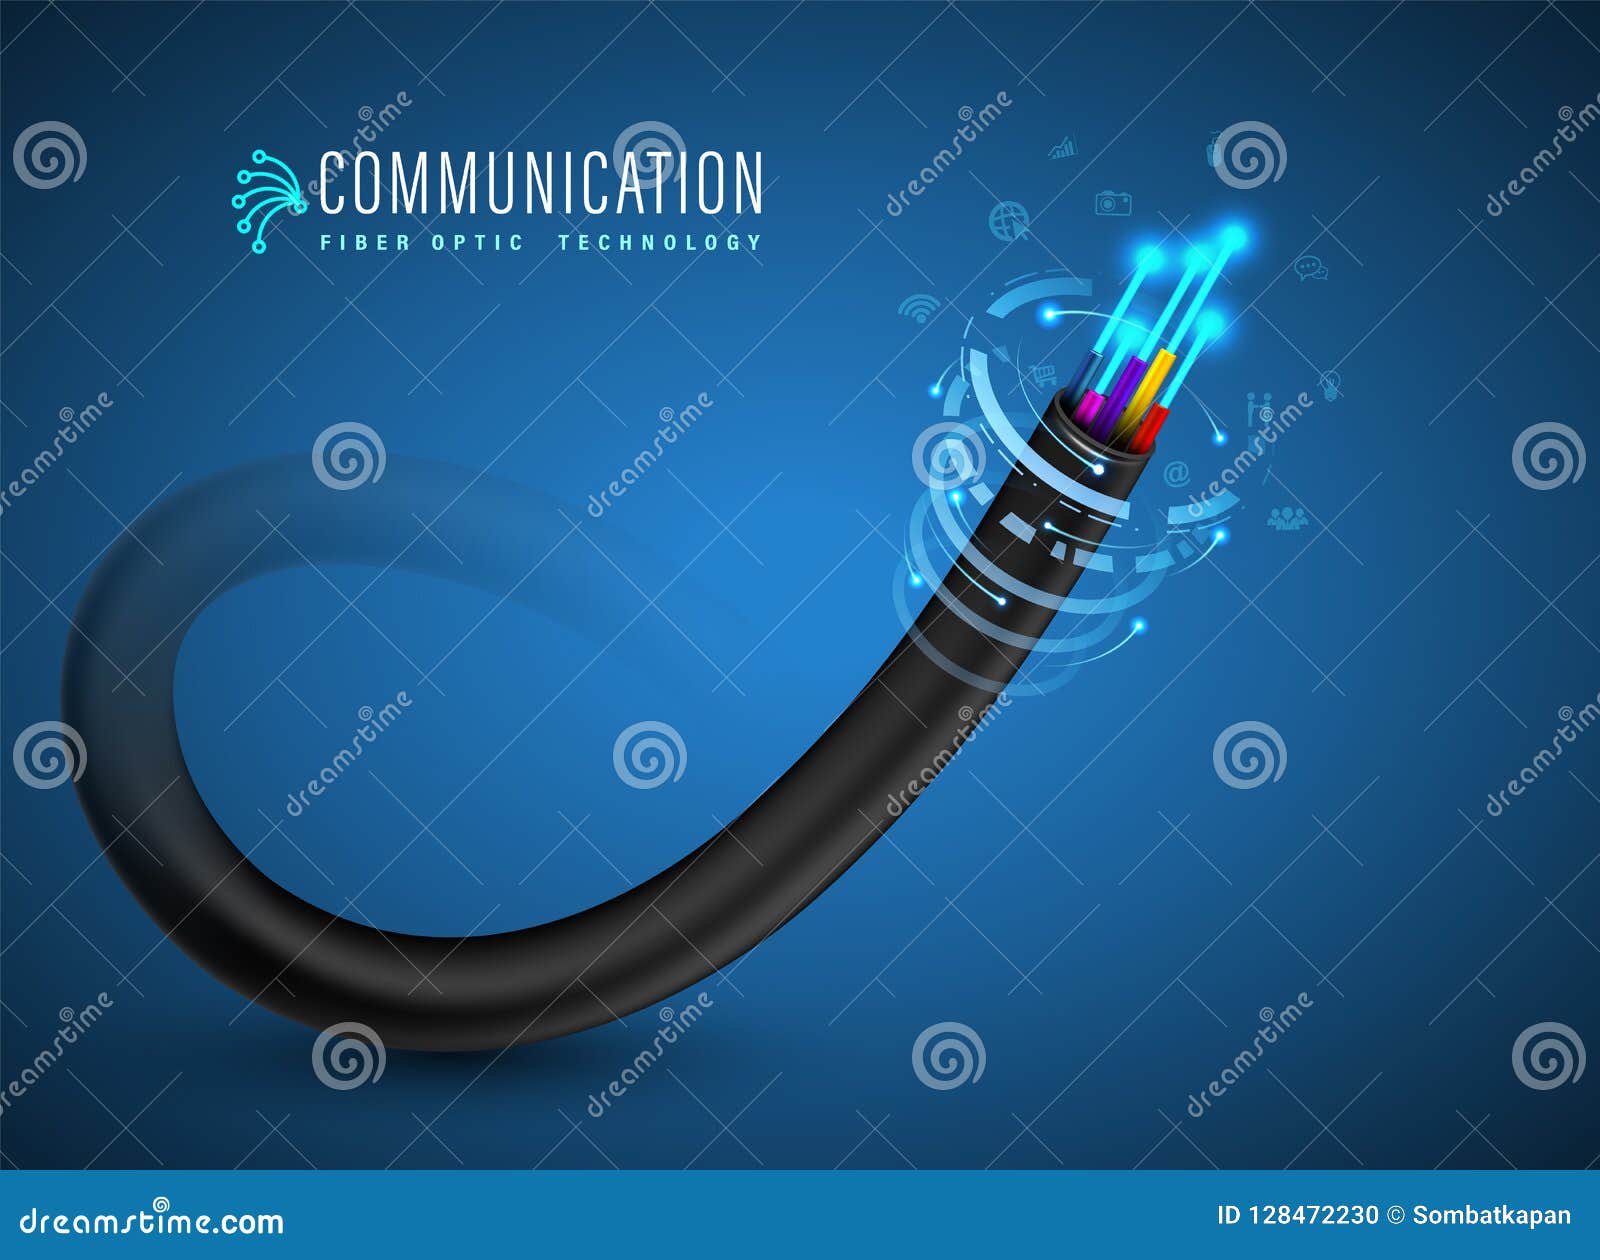 fiber optic cable for fiber optic concept and advertising communication services